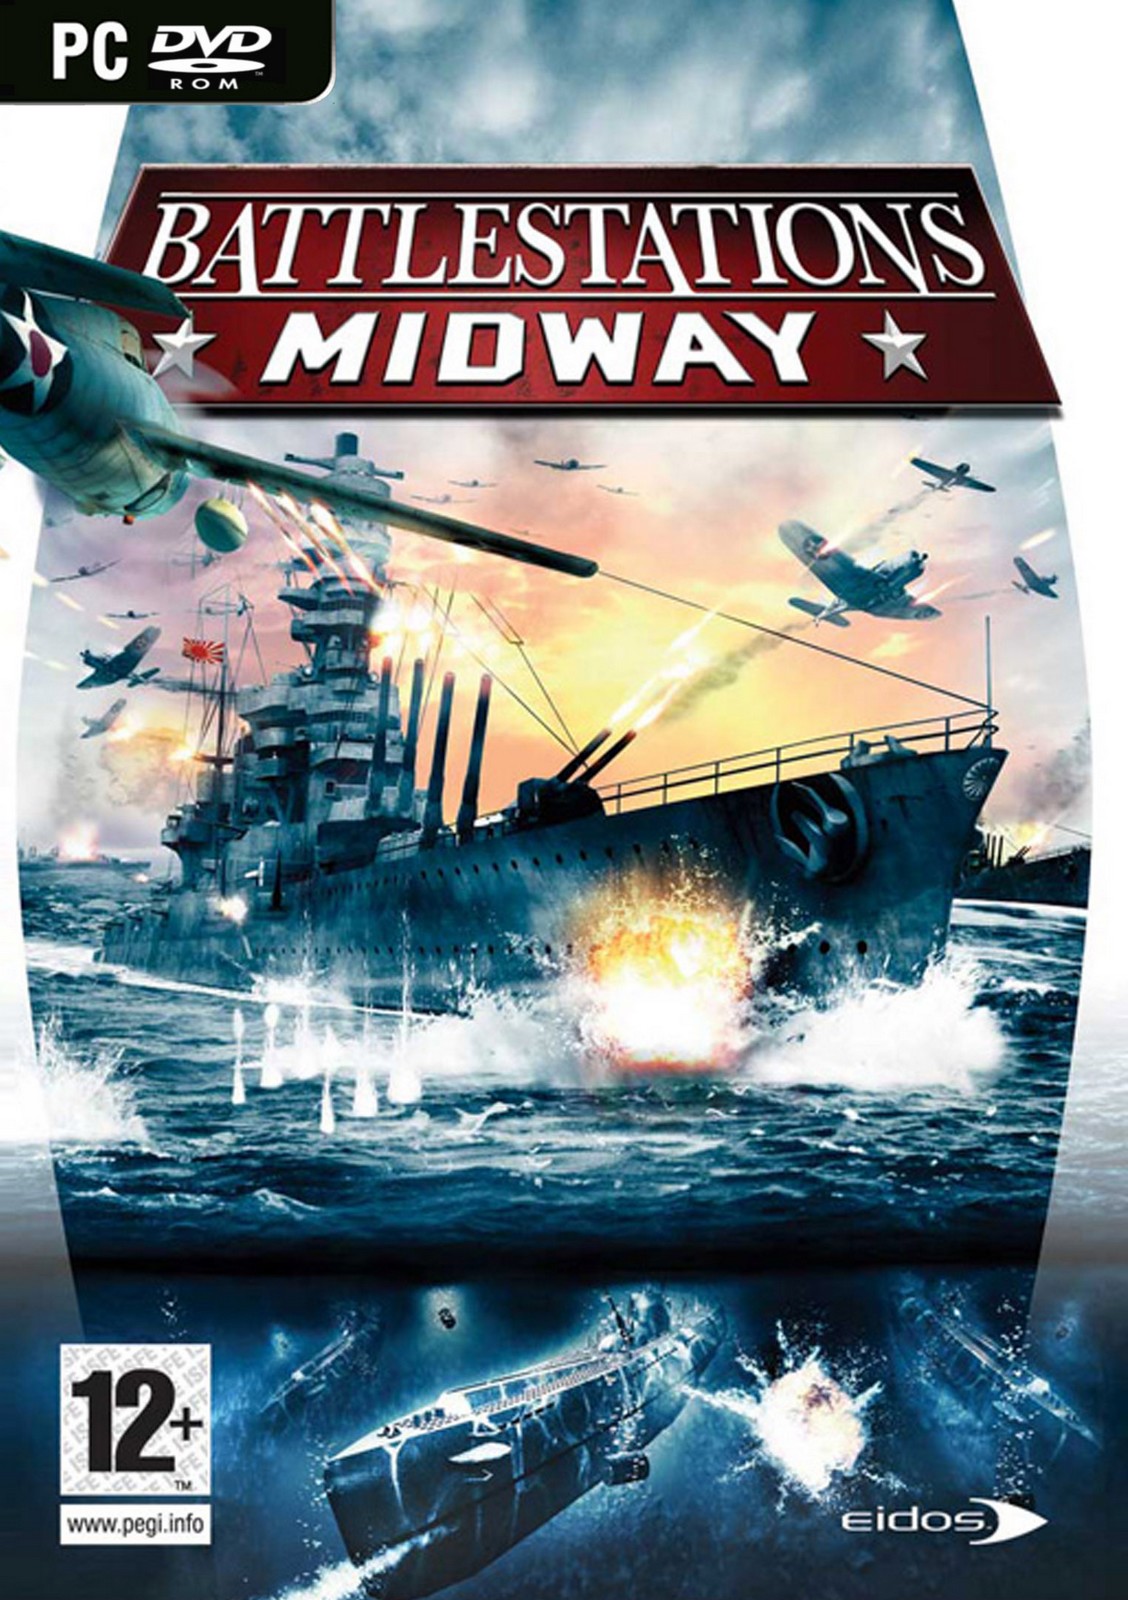 Battlestations Midway Strategywiki The Video Game Walkthrough And Strategy Guide Wiki